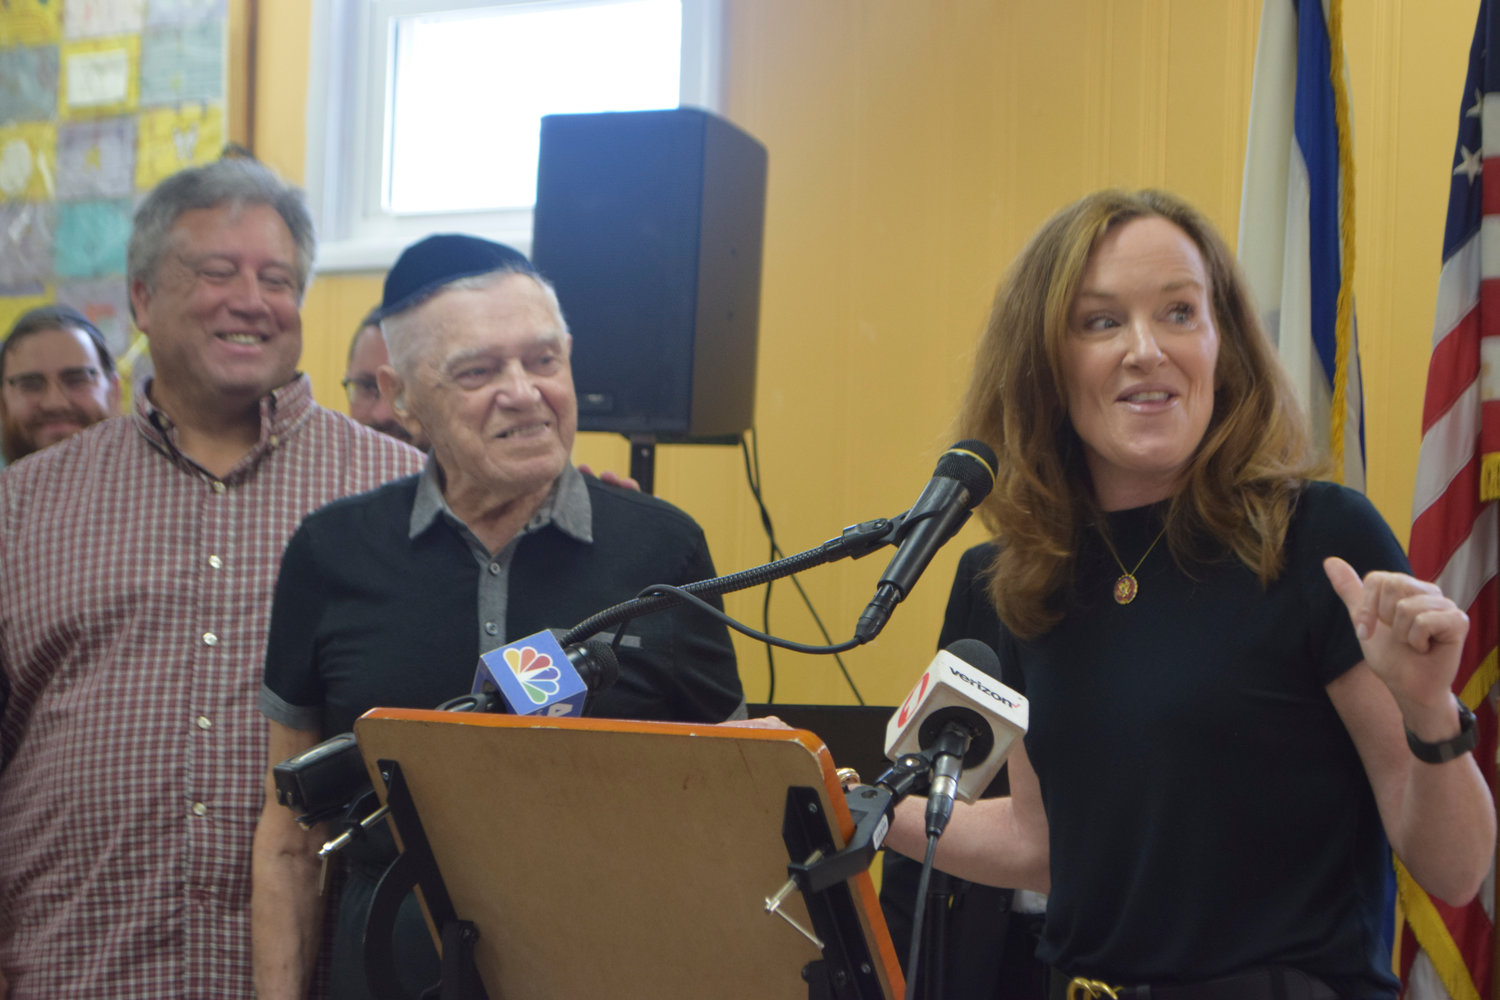 Holocaust survivor Marvin Jacobs, center, was honored by the Gural JCC on June 6. With him were his son, David Jacobs, and U.S. Rep. Kathleen Rice.